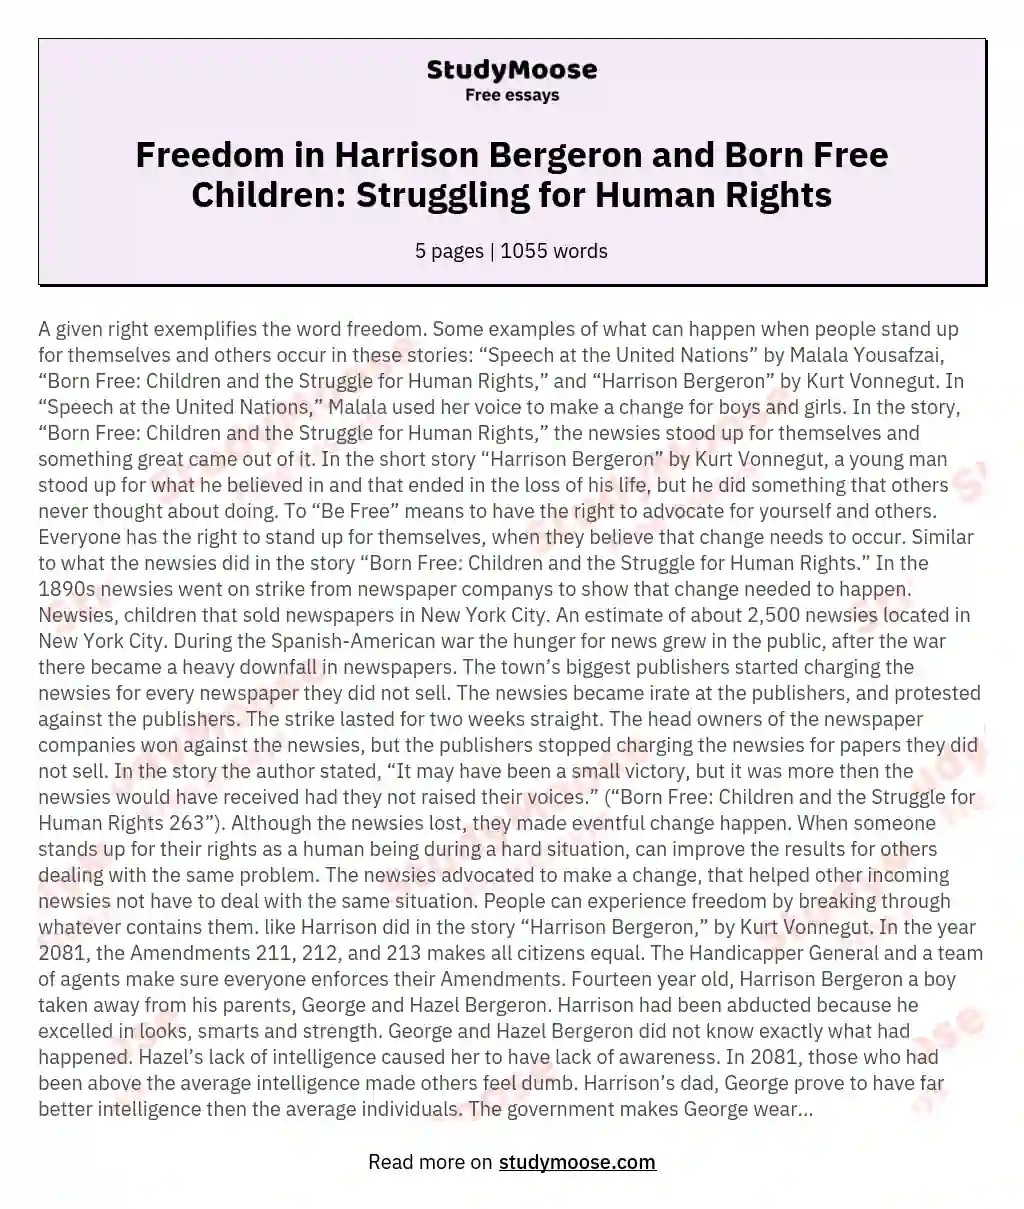 Stand for Freedom in "Harrison Bergeron" and "Born Free: Children and the Struggle for Human Rights"